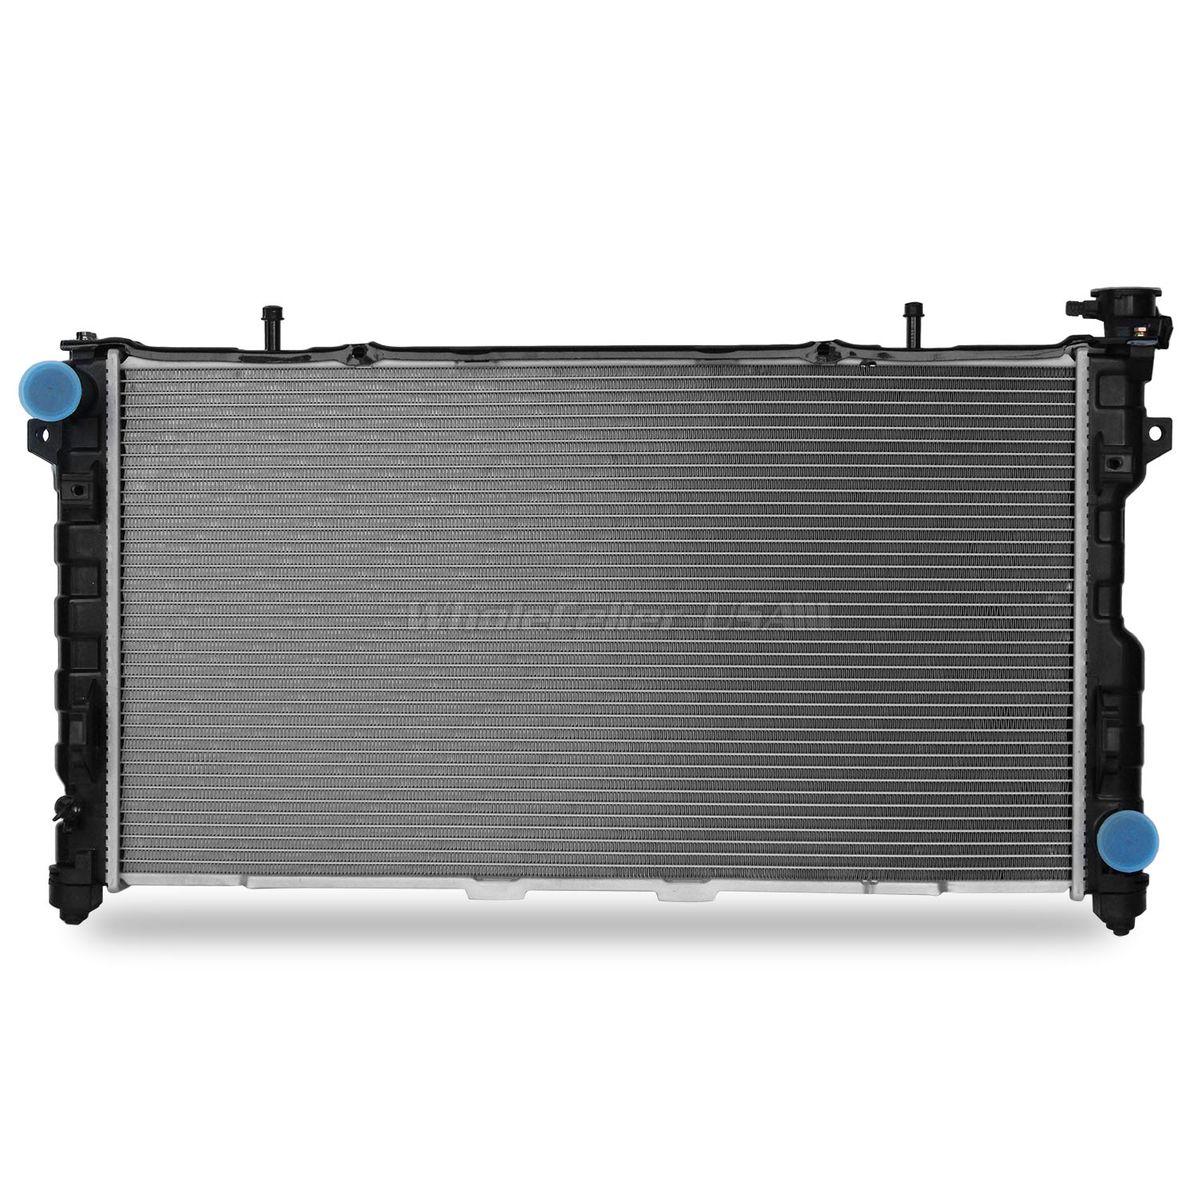 2795 RADIATOR FOR CHRYSLER TOWN/COUNTRY VOYAGER 3.3L 3.8L V6 2005 2006 2007 | eBay Radiator For A 2006 Chrysler Town And Country